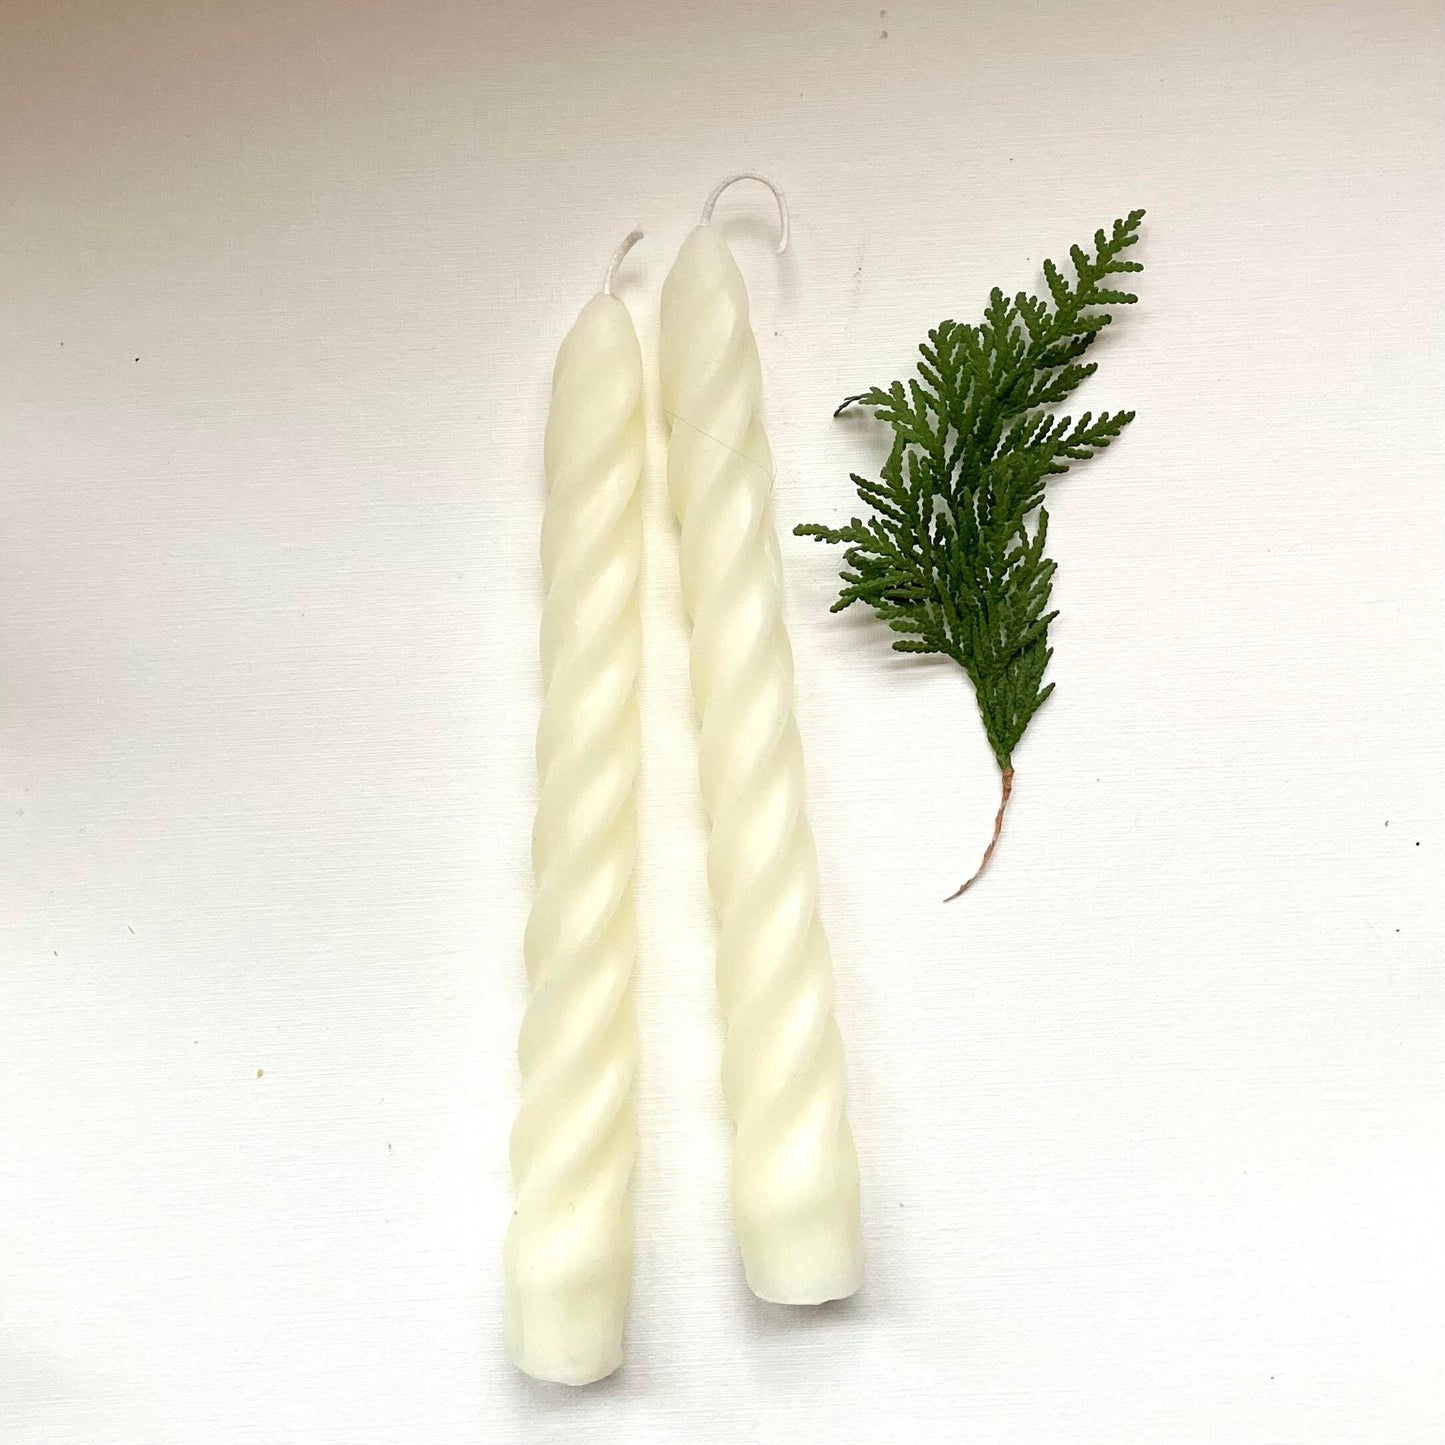 White Beeswax Twisted Taper Candles, Pair of 2 // Tapers, Twist, Tapered Candles, Beeswax Candles, 8" Tapers, Eco Friendly, Decor, Candles